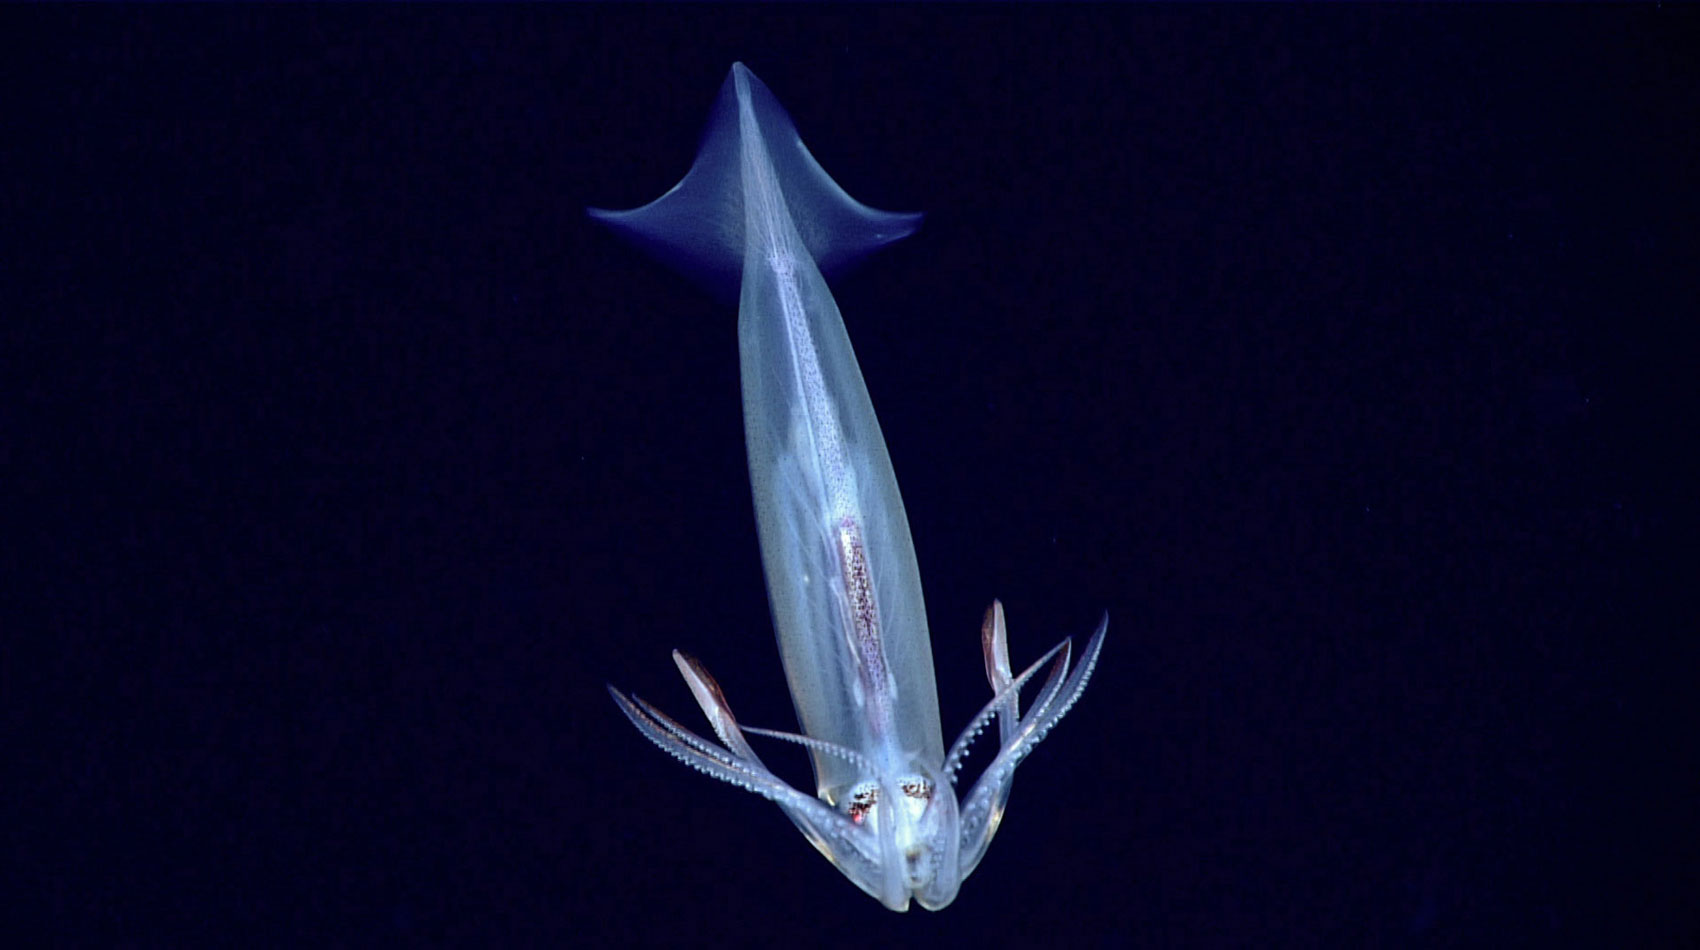 Northern shortfin squid (Illex illecebrosus) seen while diving in Uchupi Canyon during the 2021 ROV Shakedown.